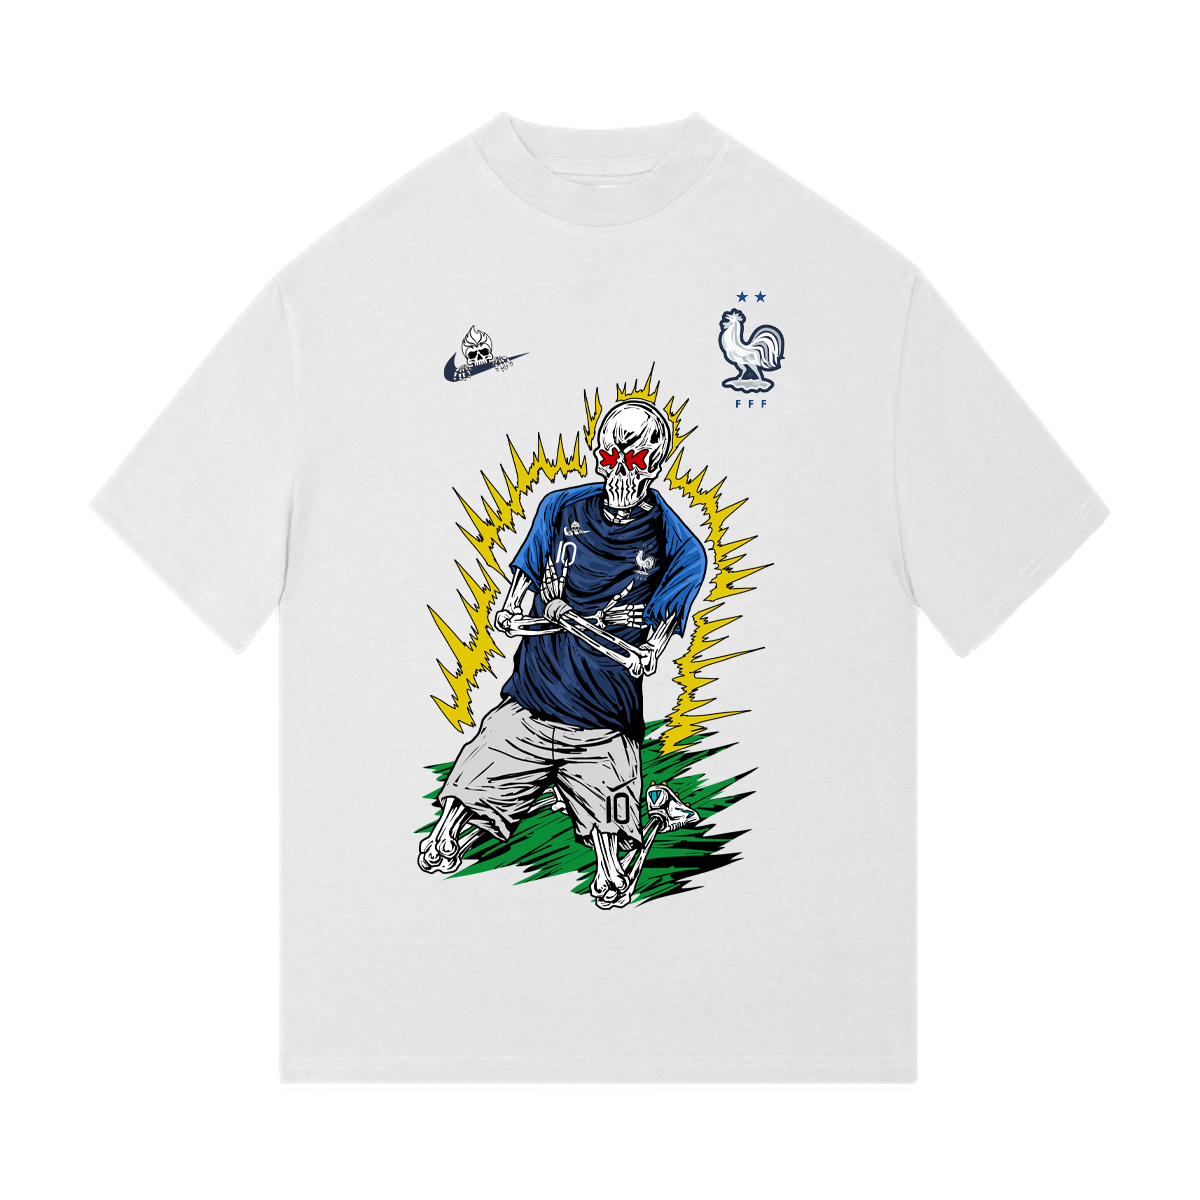 INCARNAPE FRANCE MBAPPE "THE DEFENDING CHAMPS" TEE - Off-white